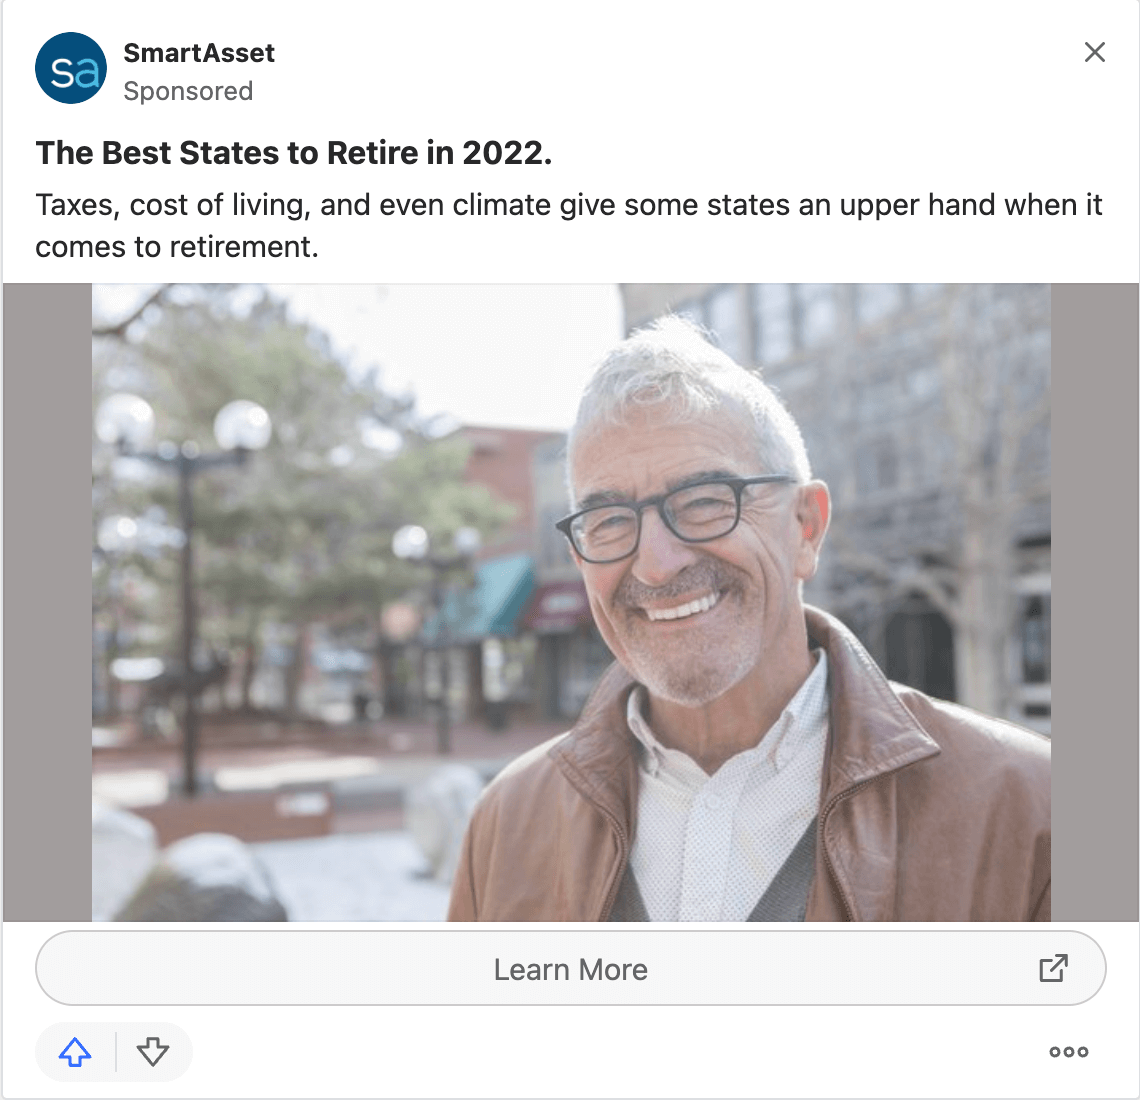 A sponsored post from SmartAsset. The Question is The Best States to Retire in 2022. A photo of a smiling older white man accompanies the question. 